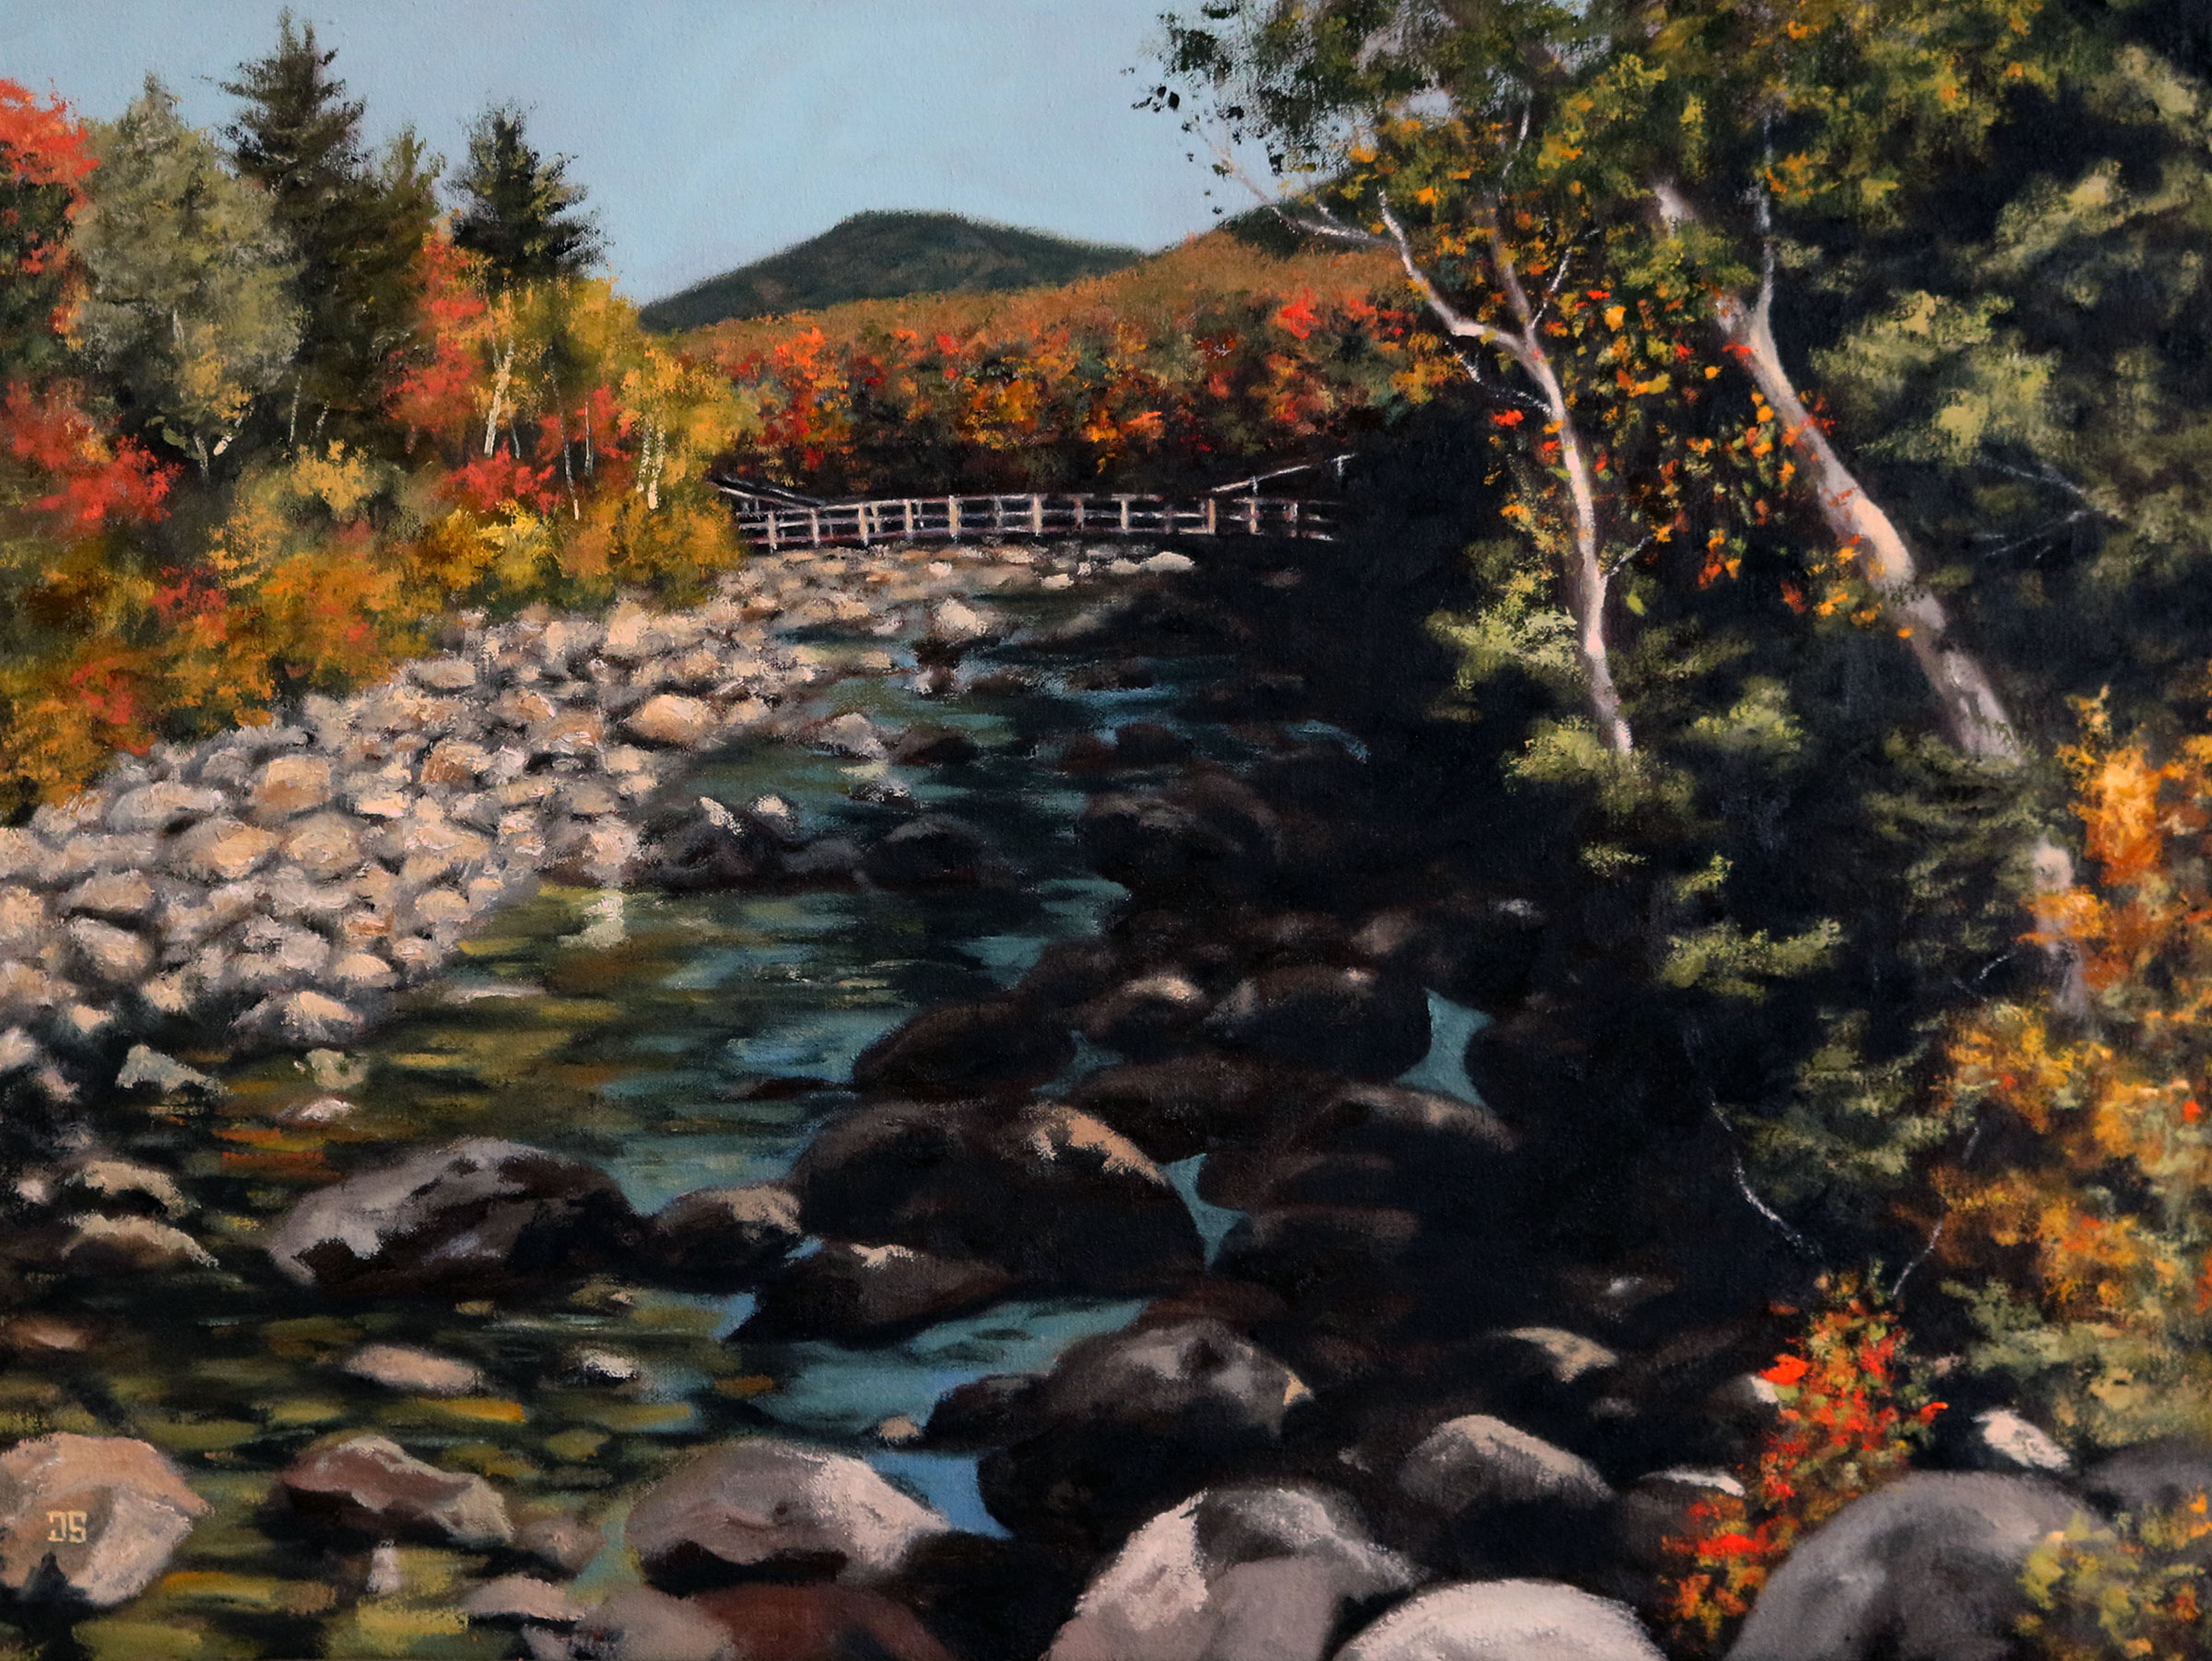 Oil painting "Lincoln Woods, White Mountain National Forest, New Hampshire" by Jeffrey Dale Starr